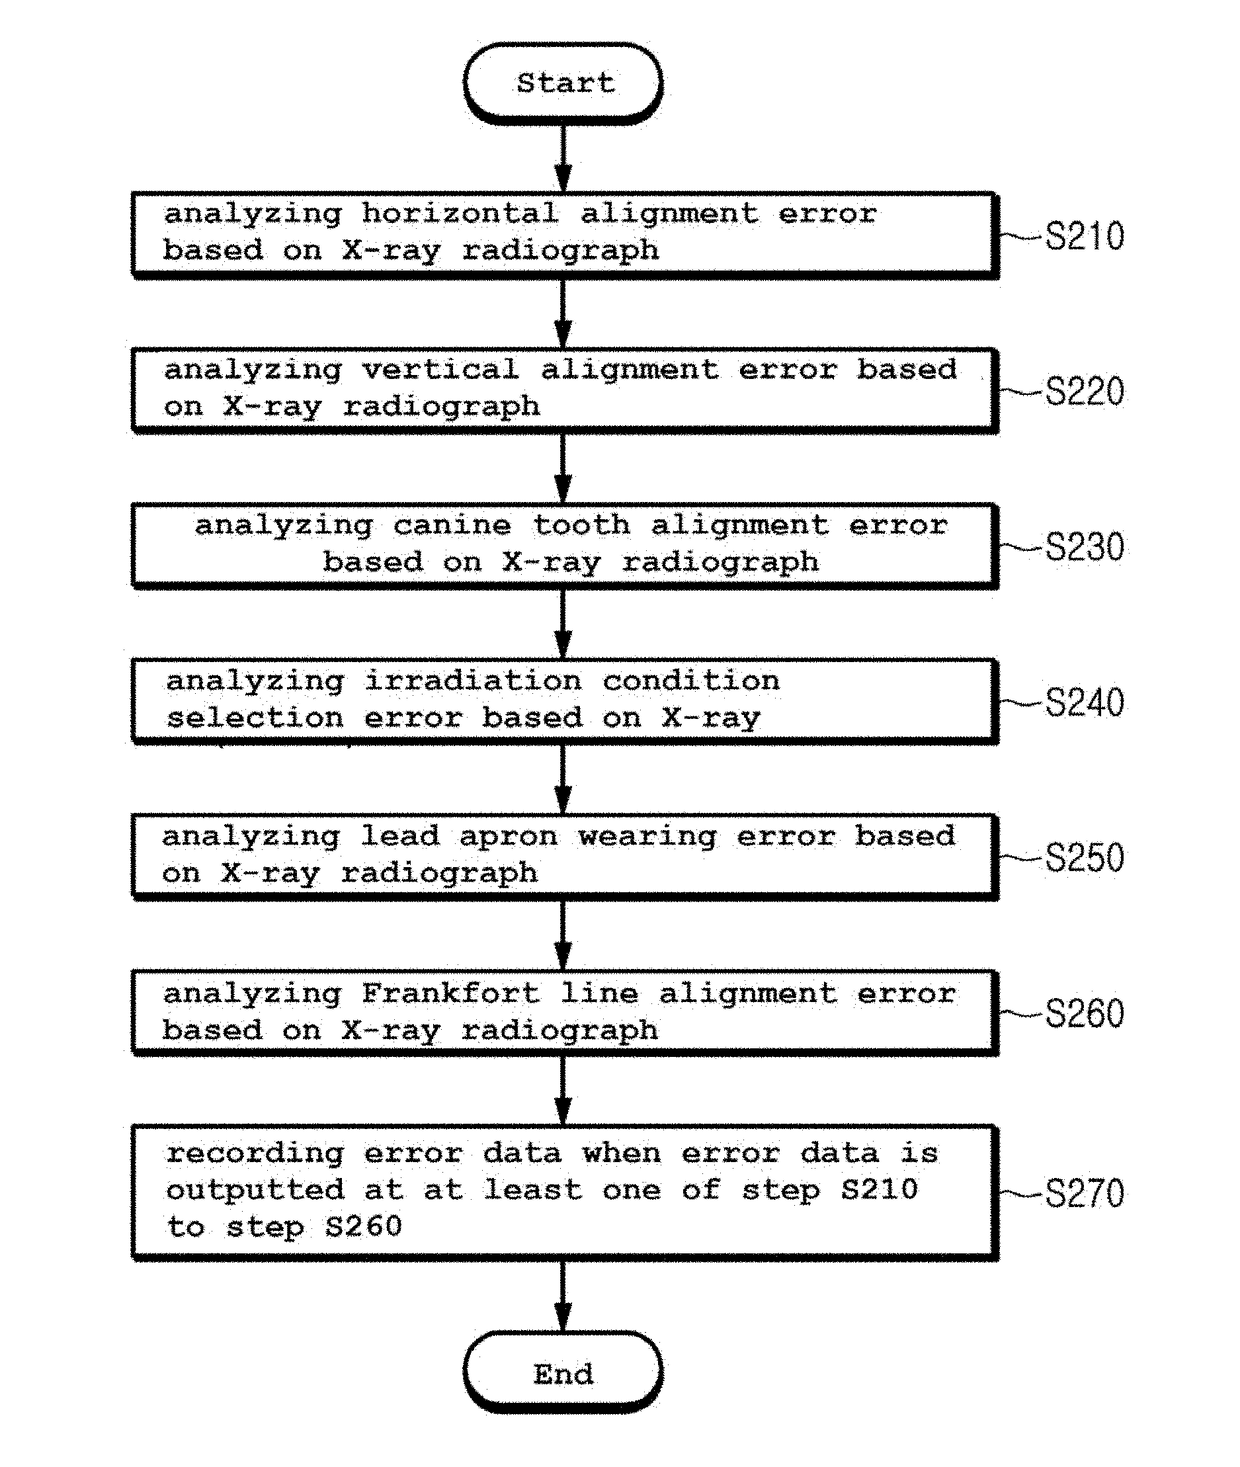 Apparatus and method for analyzing radiography position error or radiography condition error or both based on x-ray radiograph